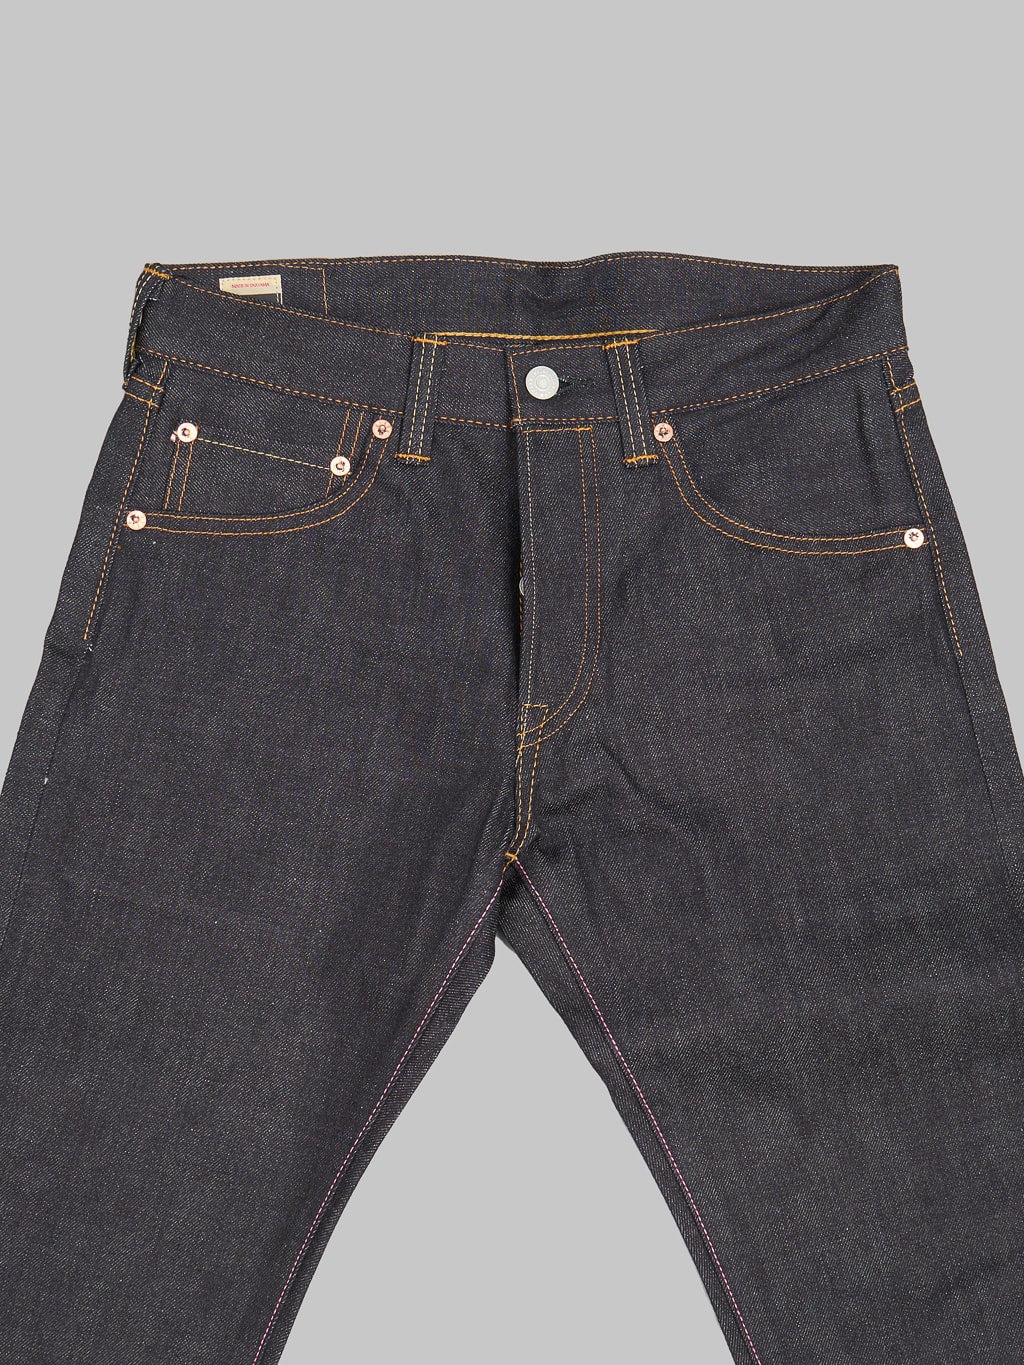 Momotaro 0306 12SP Going To Battle 12oz Tight Tapered Jeans  high rise